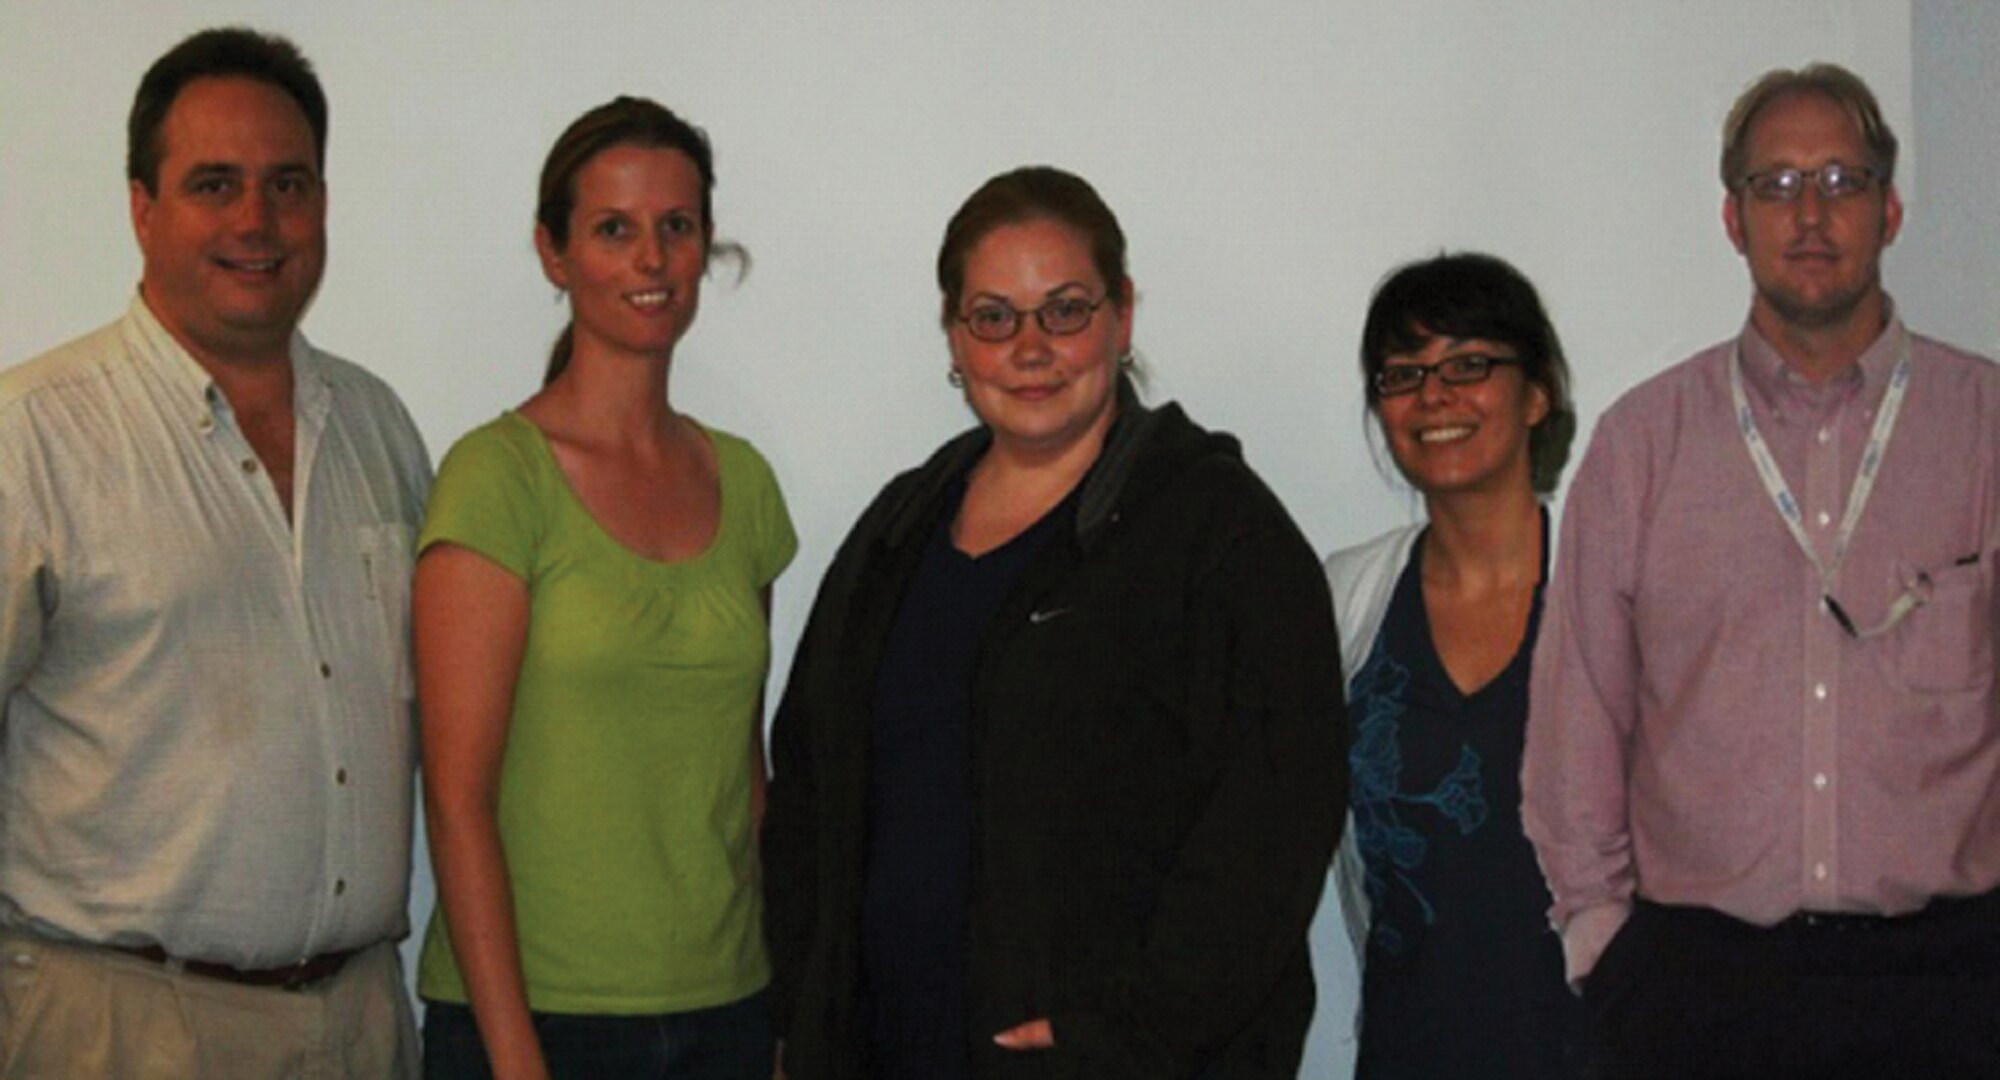 Members of the AFRL 711th Human Performance Wing, Human Effectiveness Directorate, Ophthalmic Imaging and Laser Damage team completed an experiment with important implications to understanding laser-induced effects on biological systems.  Pictured left to right are Dr. Jeff Oliver (AFRL), Dr. Rebecca Vincelette (AFRL), Ms. Aurora Shingledecker (Northrop Grumman Information Technology [NGIT]), Ms. Ginger Pocock (AFRL), and Mr. Kurt Schuster (NGIT).